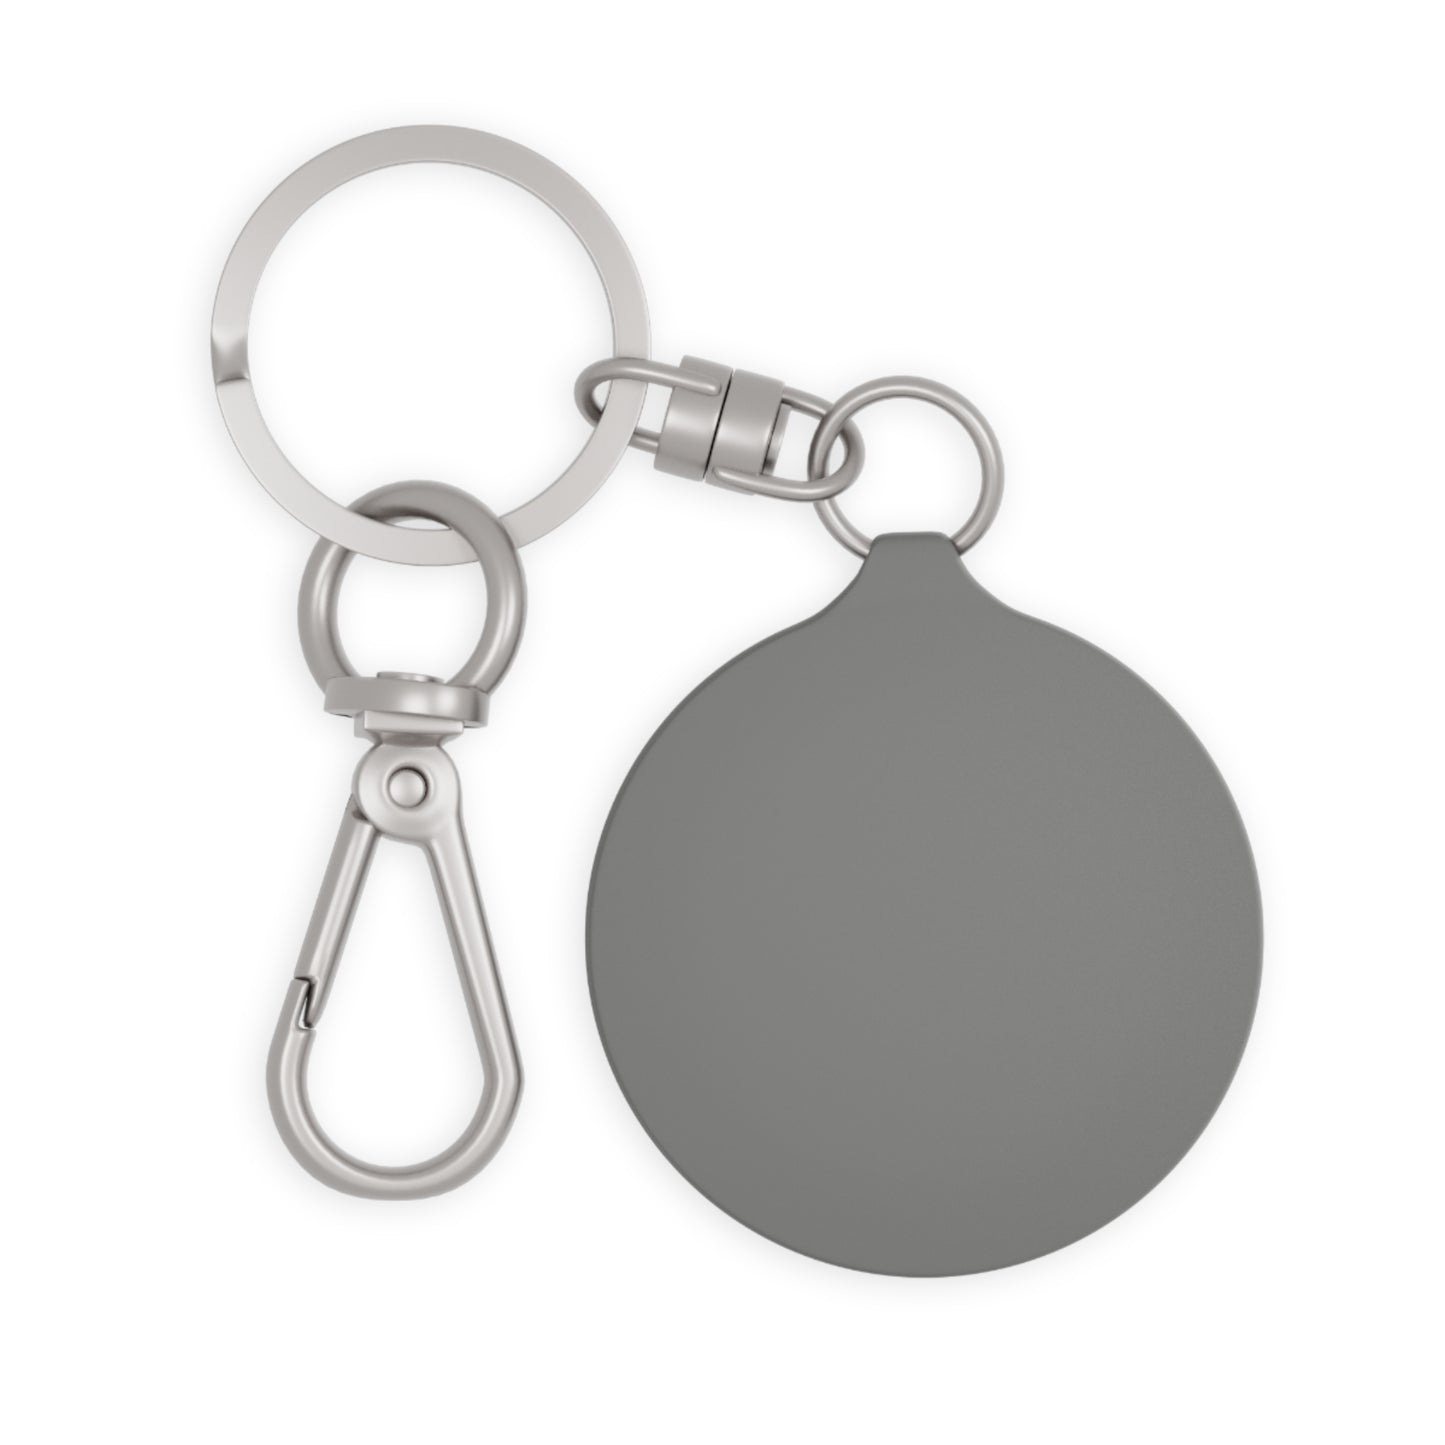 Field Key Ring (SP Photography Collection)